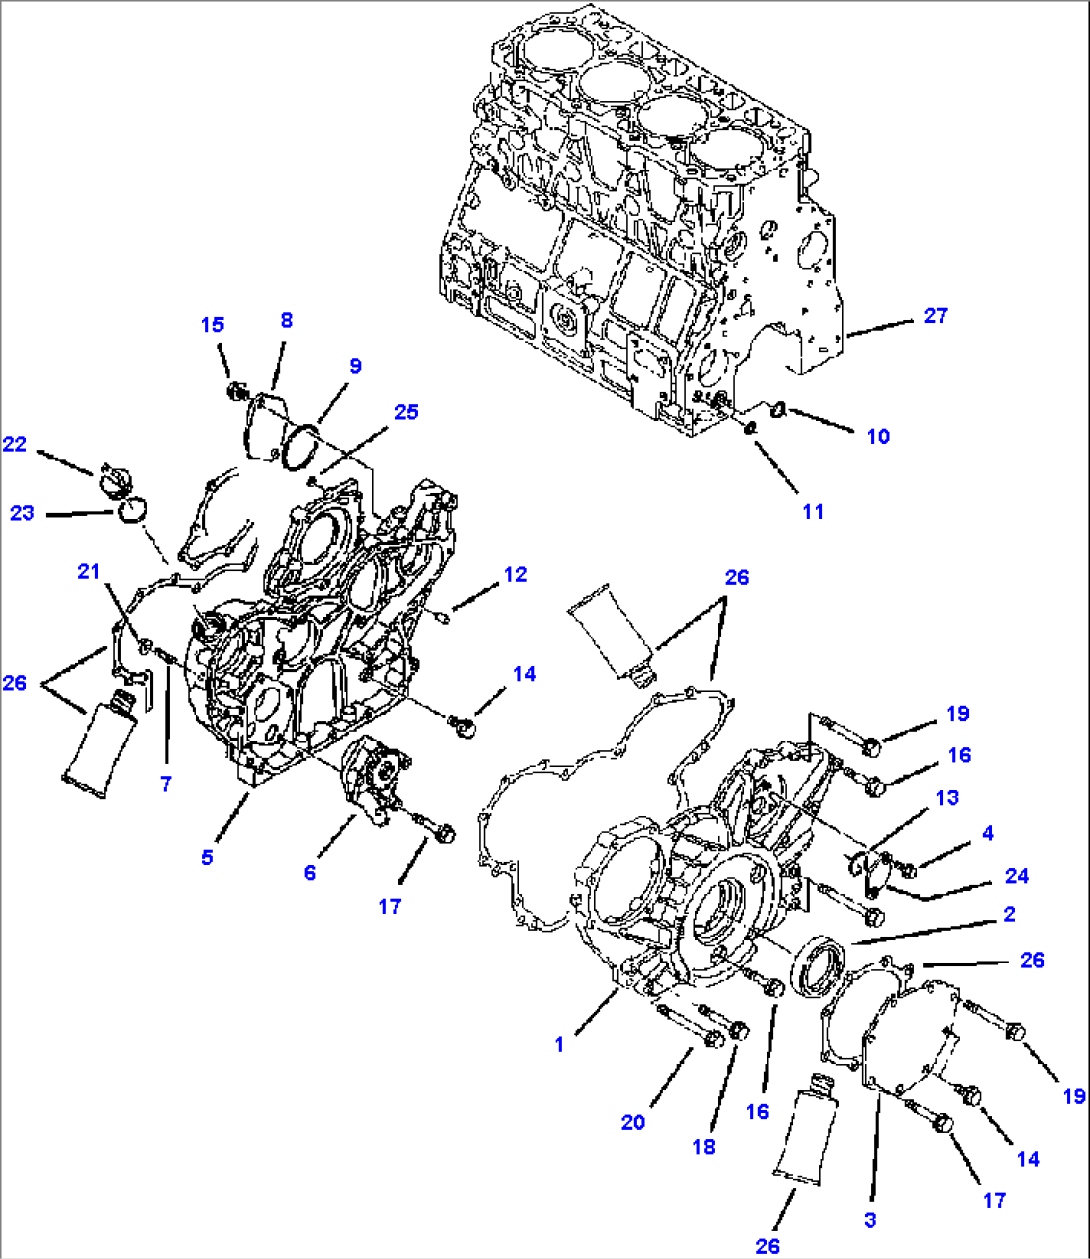 FIG. A0111-01A0 TIER I ENGINE - GEAR HOUSING AND OIL PUMP